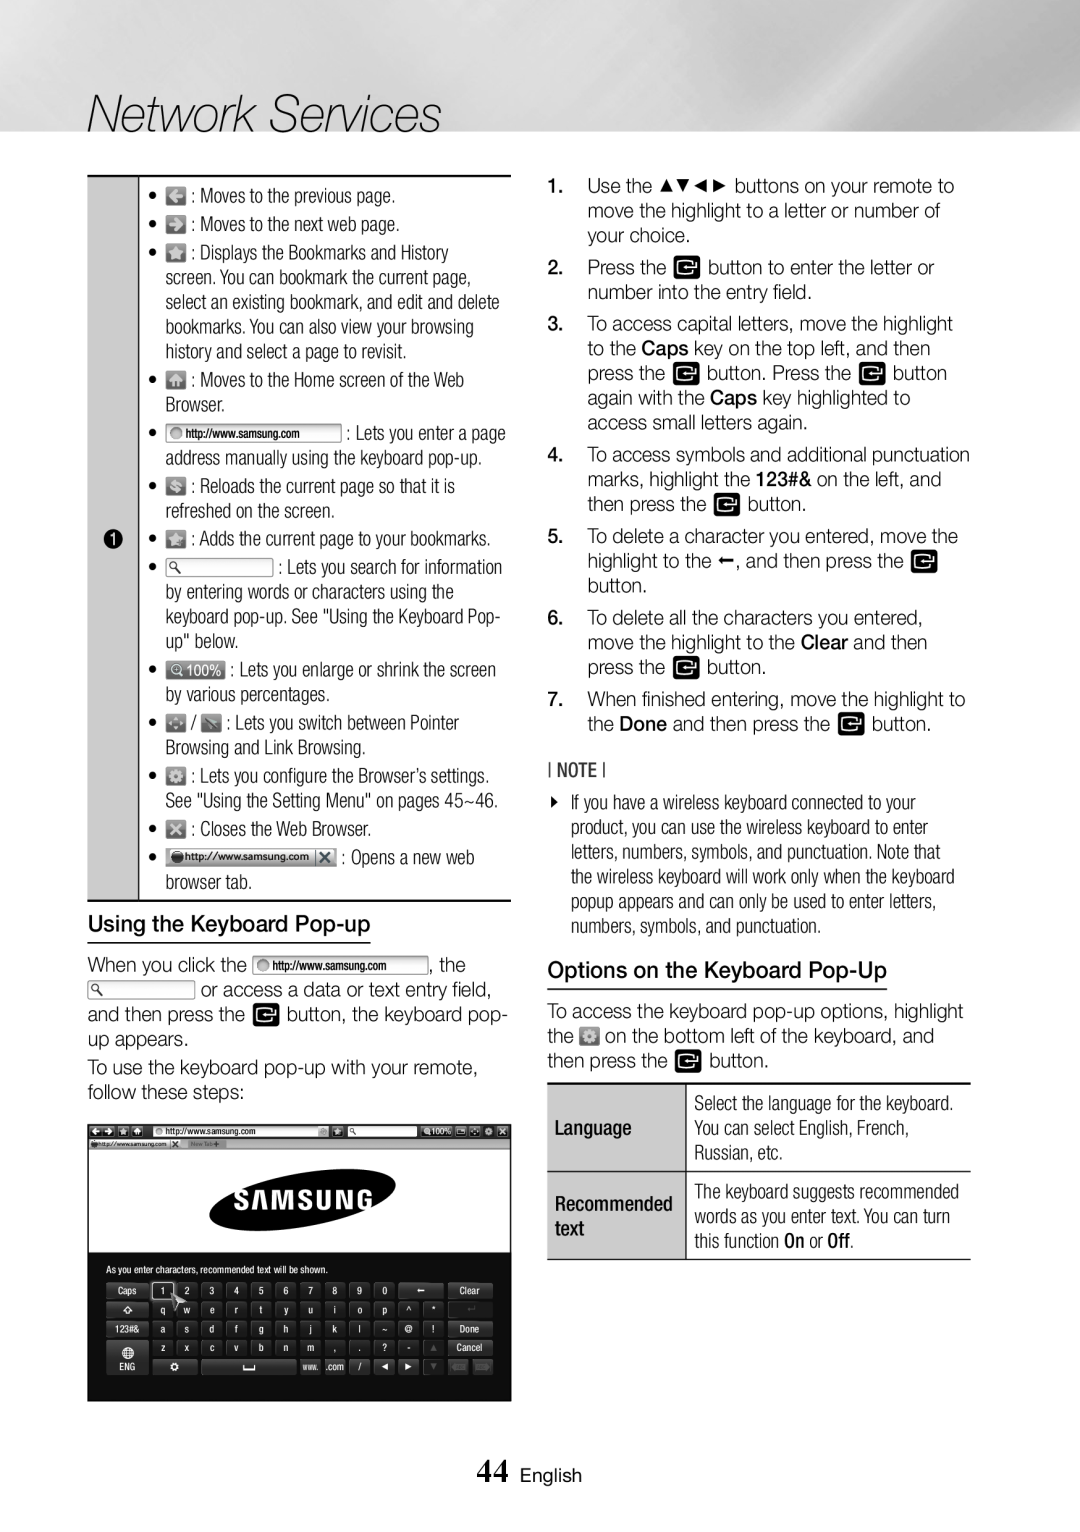 Samsung BD-J7500/EN manual Using the Keyboard Pop-up, Options on the Keyboard Pop-Up, Network Services 